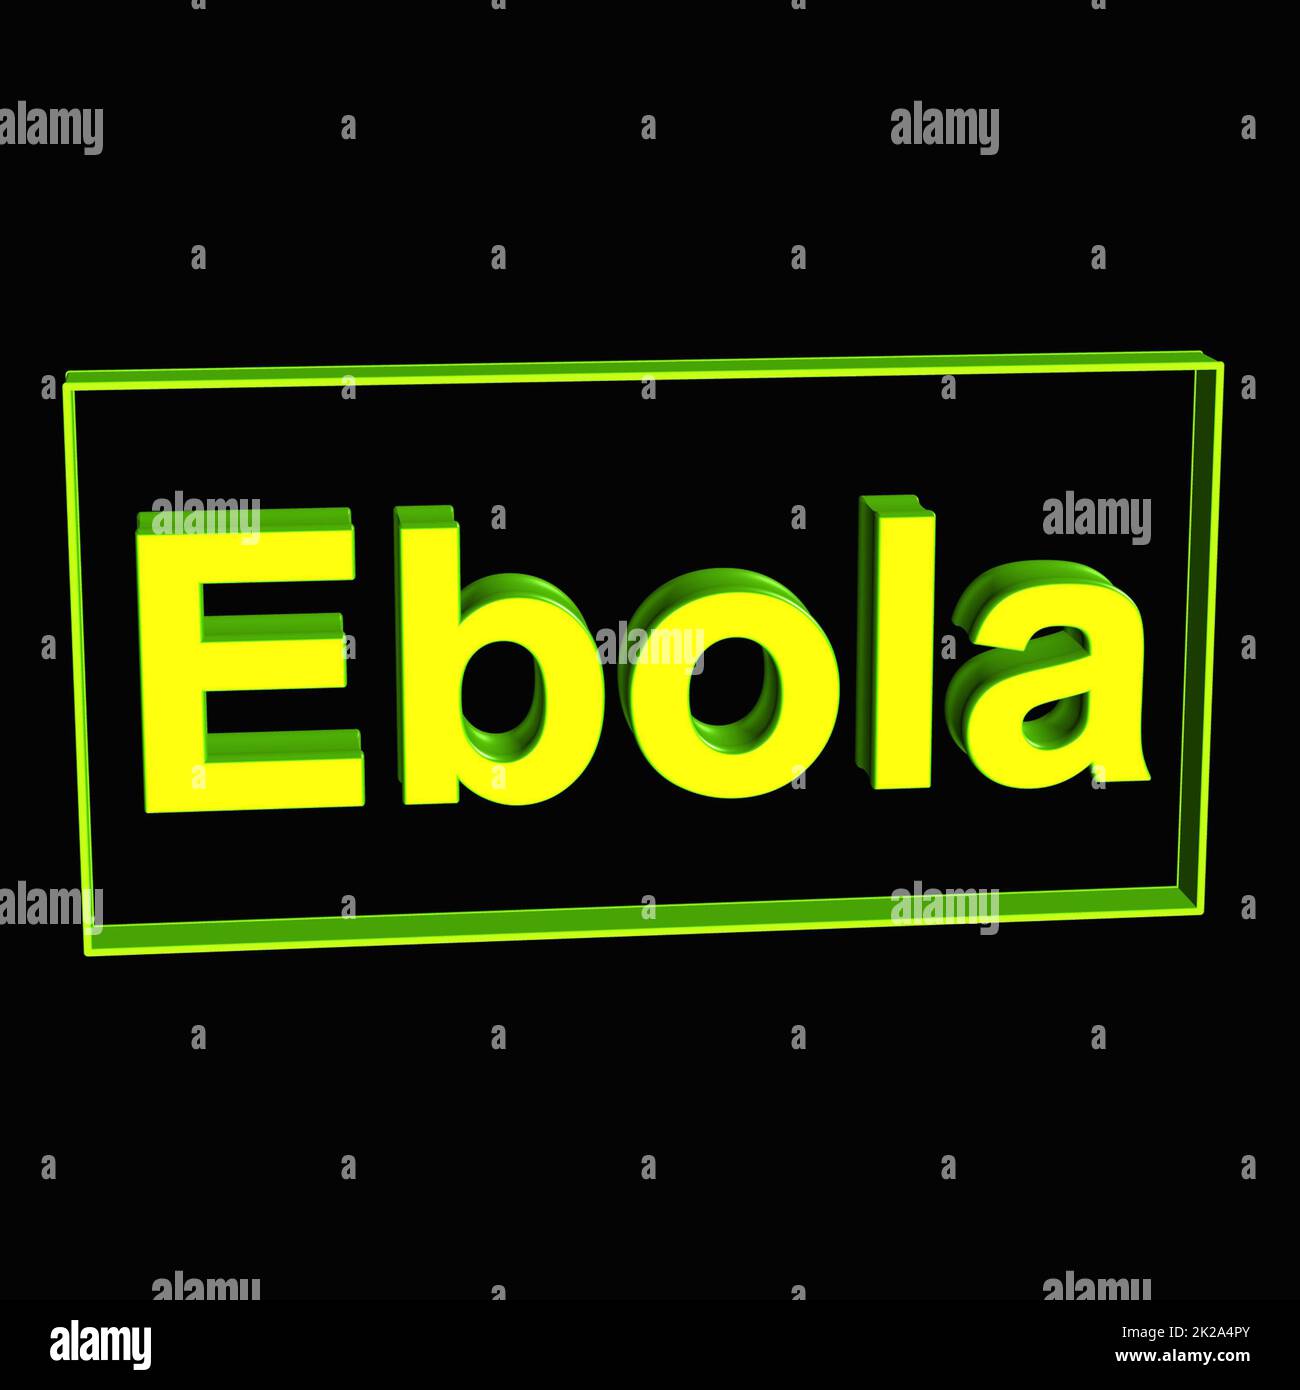 Ebola - Word or text as 3D illustration, 3D rendering Stock Photo